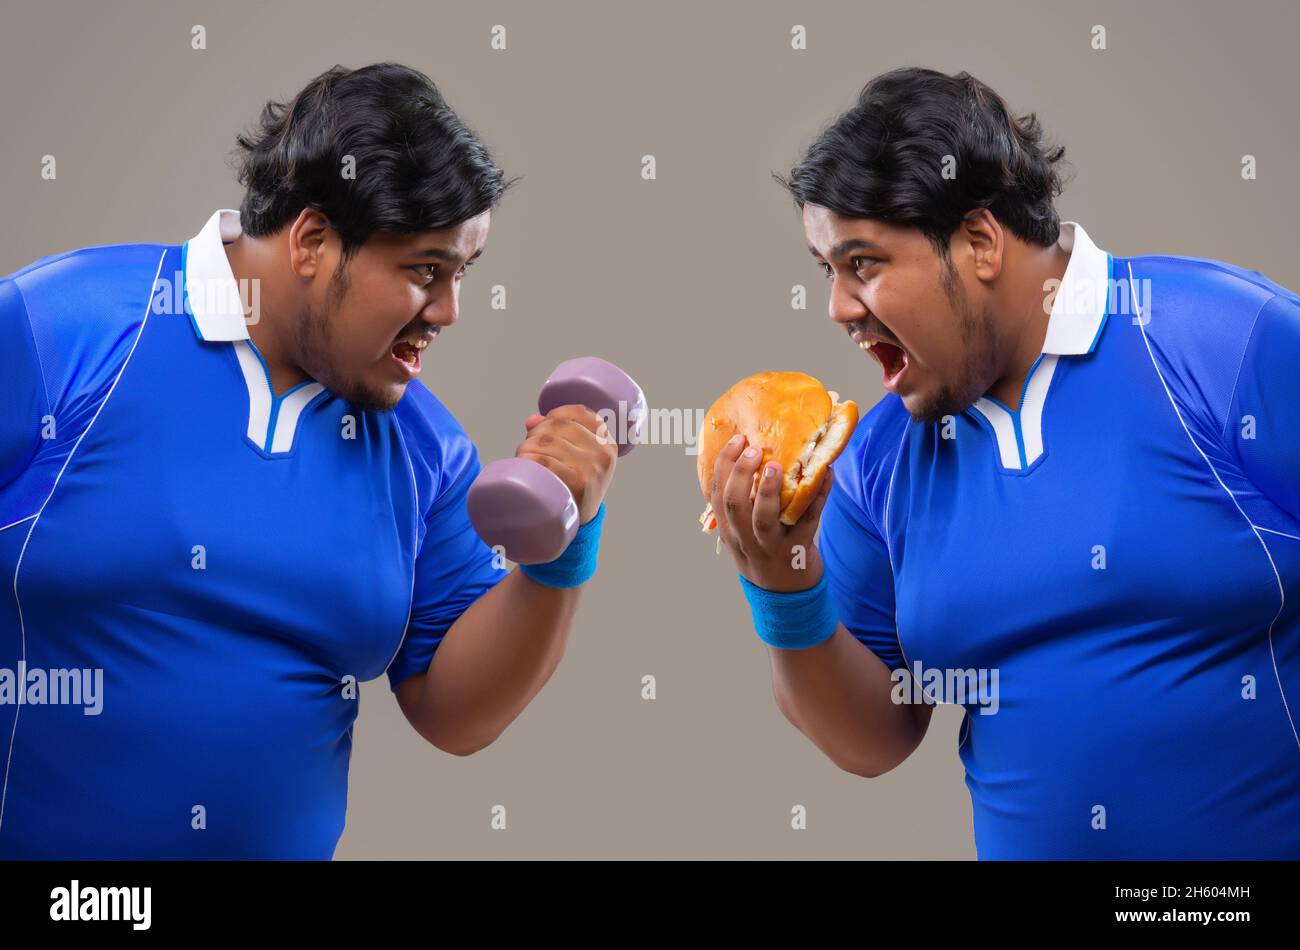 Contrast of fat man holding dumbles against him eating burger. Stock Photo